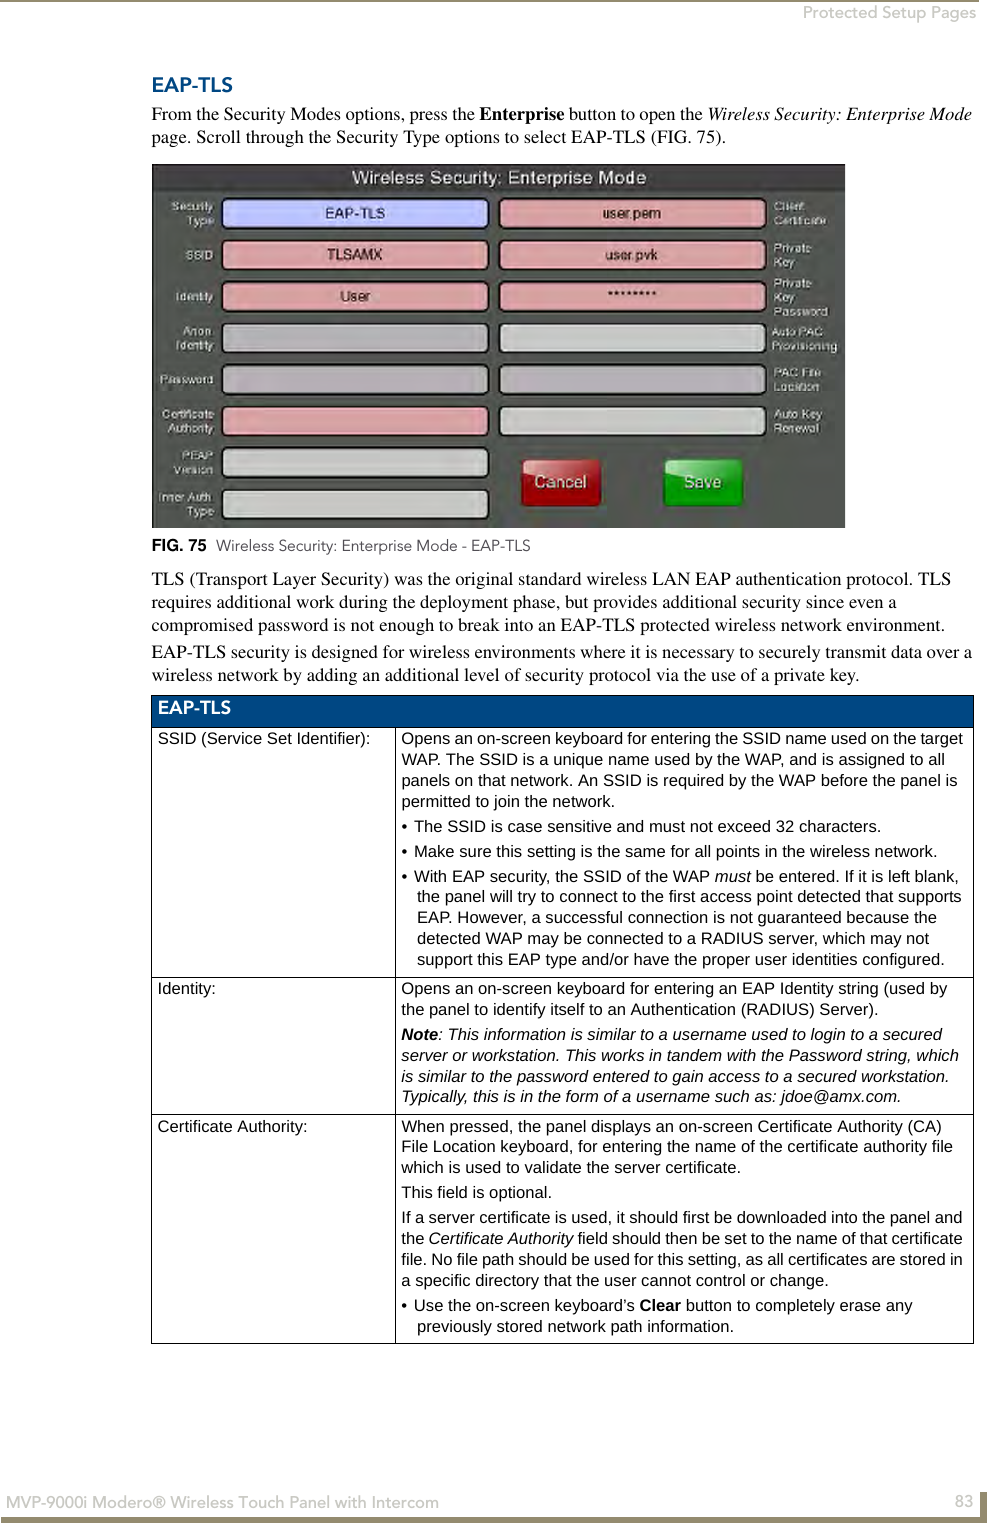 Protected Setup Pages83MVP-9000i Modero® Wireless Touch Panel with IntercomEAP-TLSFrom the Security Modes options, press the Enterprise button to open the Wireless Security: Enterprise Mode page. Scroll through the Security Type options to select EAP-TLS (FIG. 75).     TLS (Transport Layer Security) was the original standard wireless LAN EAP authentication protocol. TLS requires additional work during the deployment phase, but provides additional security since even a compromised password is not enough to break into an EAP-TLS protected wireless network environment.EAP-TLS security is designed for wireless environments where it is necessary to securely transmit data over a wireless network by adding an additional level of security protocol via the use of a private key.  FIG. 75  Wireless Security: Enterprise Mode - EAP-TLSEAP-TLSSSID (Service Set Identifier): Opens an on-screen keyboard for entering the SSID name used on the target WAP. The SSID is a unique name used by the WAP, and is assigned to all panels on that network. An SSID is required by the WAP before the panel is permitted to join the network. • The SSID is case sensitive and must not exceed 32 characters. • Make sure this setting is the same for all points in the wireless network.• With EAP security, the SSID of the WAP must be entered. If it is left blank, the panel will try to connect to the first access point detected that supports EAP. However, a successful connection is not guaranteed because the detected WAP may be connected to a RADIUS server, which may not support this EAP type and/or have the proper user identities configured.Identity: Opens an on-screen keyboard for entering an EAP Identity string (used by the panel to identify itself to an Authentication (RADIUS) Server). Note: This information is similar to a username used to login to a secured server or workstation. This works in tandem with the Password string, which is similar to the password entered to gain access to a secured workstation. Typically, this is in the form of a username such as: jdoe@amx.com.Certificate Authority: When pressed, the panel displays an on-screen Certificate Authority (CA) File Location keyboard, for entering the name of the certificate authority file which is used to validate the server certificate.This field is optional.If a server certificate is used, it should first be downloaded into the panel and the Certificate Authority field should then be set to the name of that certificate file. No file path should be used for this setting, as all certificates are stored in a specific directory that the user cannot control or change.• Use the on-screen keyboard’s Clear button to completely erase any previously stored network path information.